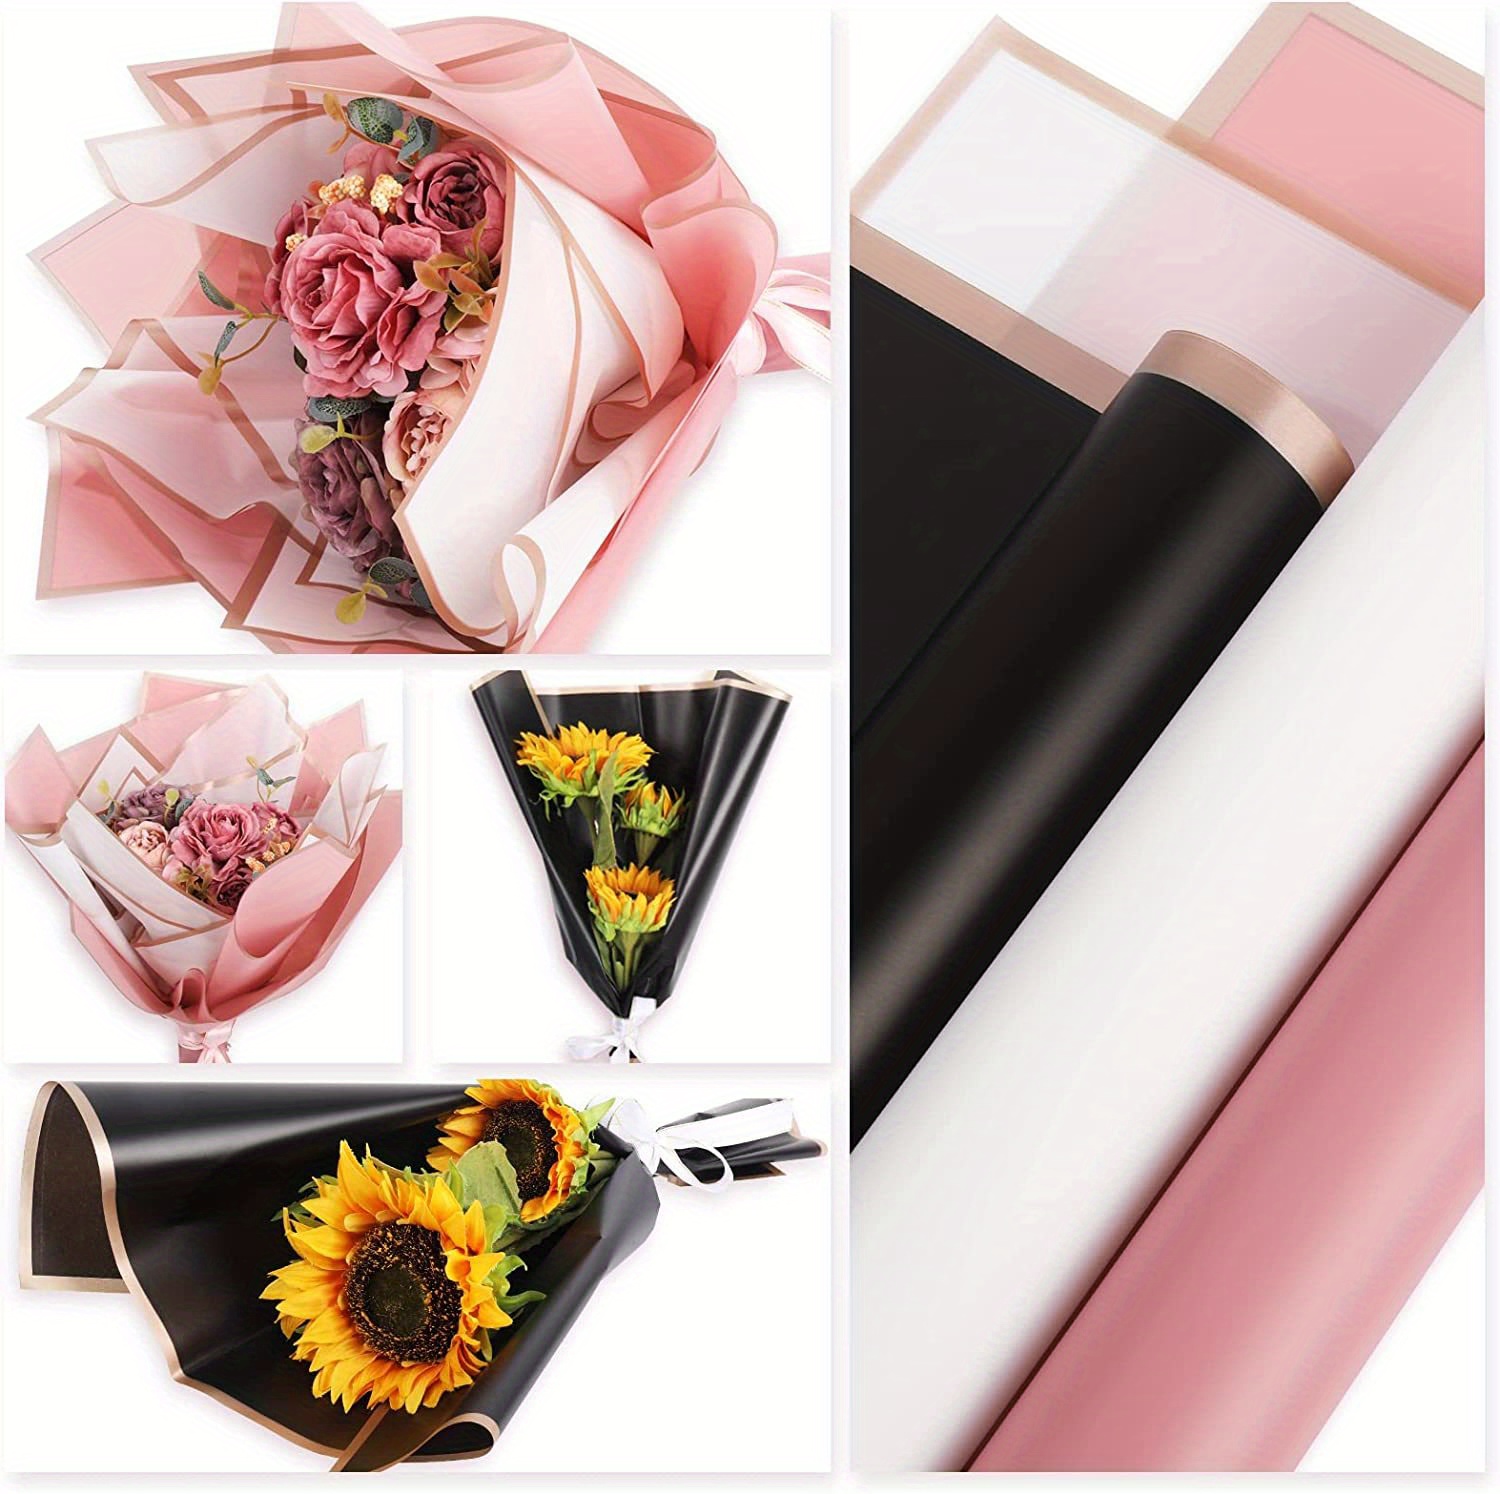 20 Sheets Waterproof Floral Wrapping Paper Sheets Flowers Bouquet